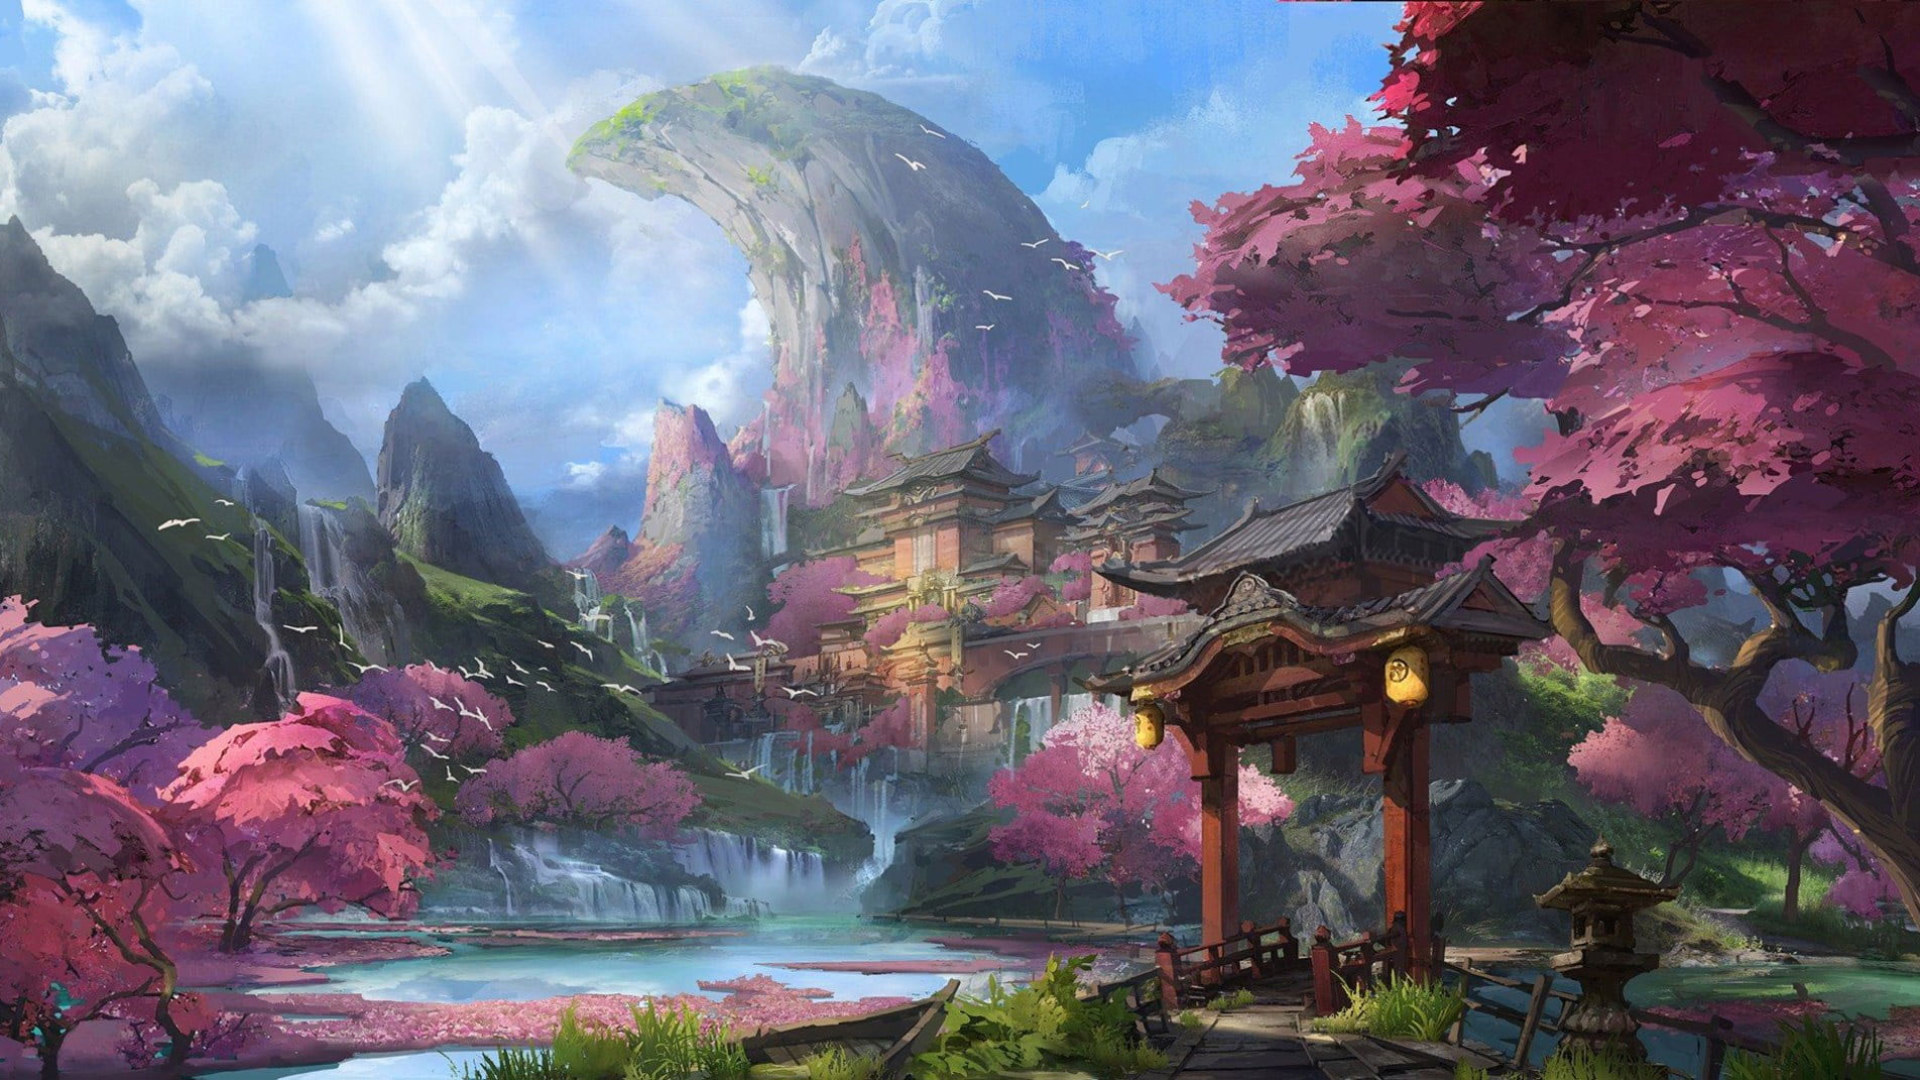 Artwork Wallpaper, Fantasy Art, Chinese Architecture, Mountains, Cherry Blossom • Wallpaper For You